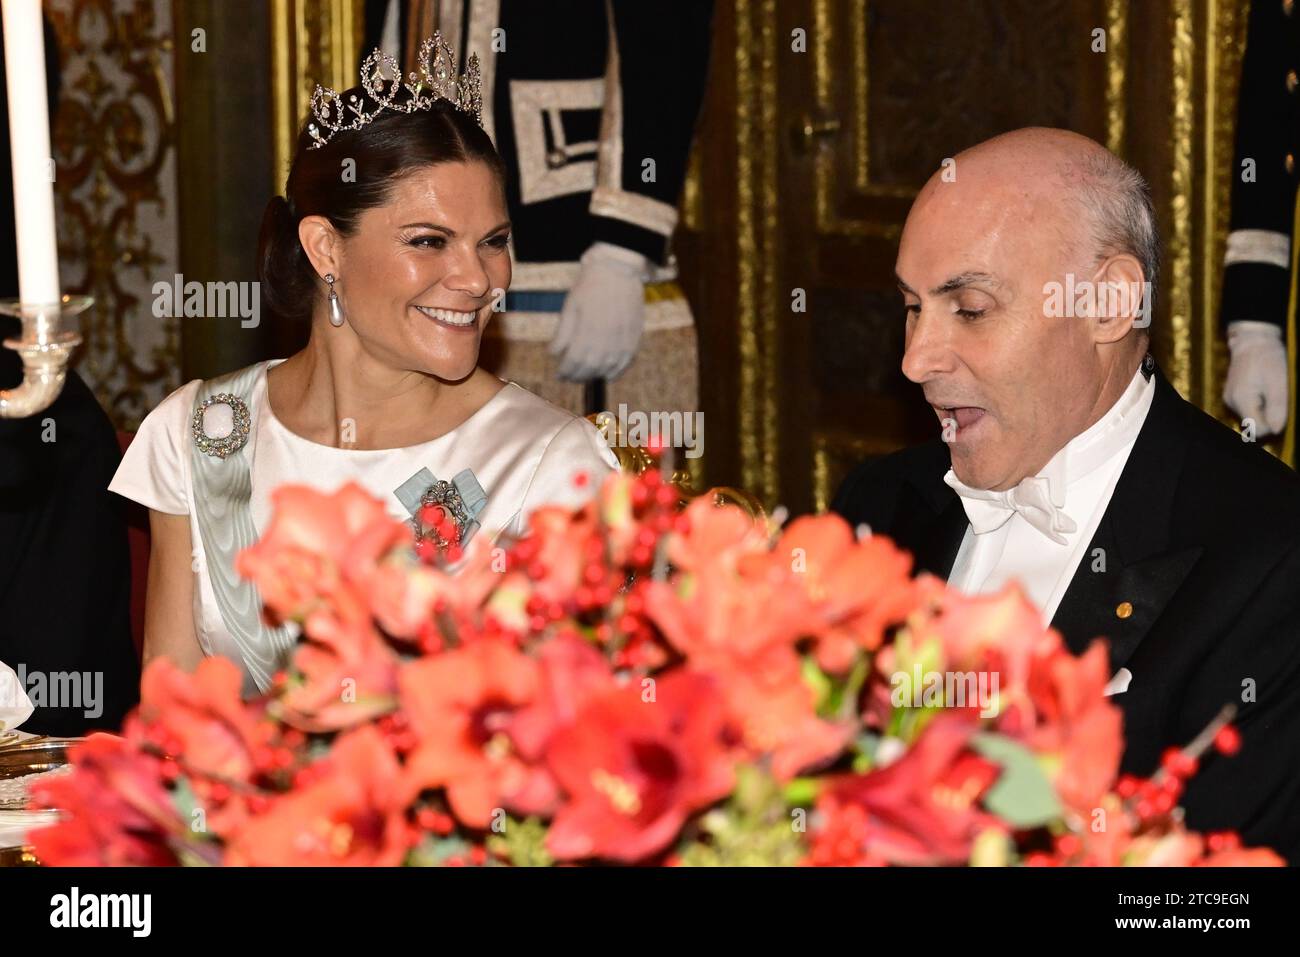 Stockholm, Sweden. 11th Dec, 2023. STOCKHOLM, SWEDEN 20231211Crown Princess Victoria and Physiology or Medicine Laureate Drew Weissman at the King's Dinner for Nobel Laureates at the Royal Palace on Monday evening. Photo: Jonas Ekströmer/TT/Code 10030 Credit: TT News Agency/Alamy Live News Stock Photo